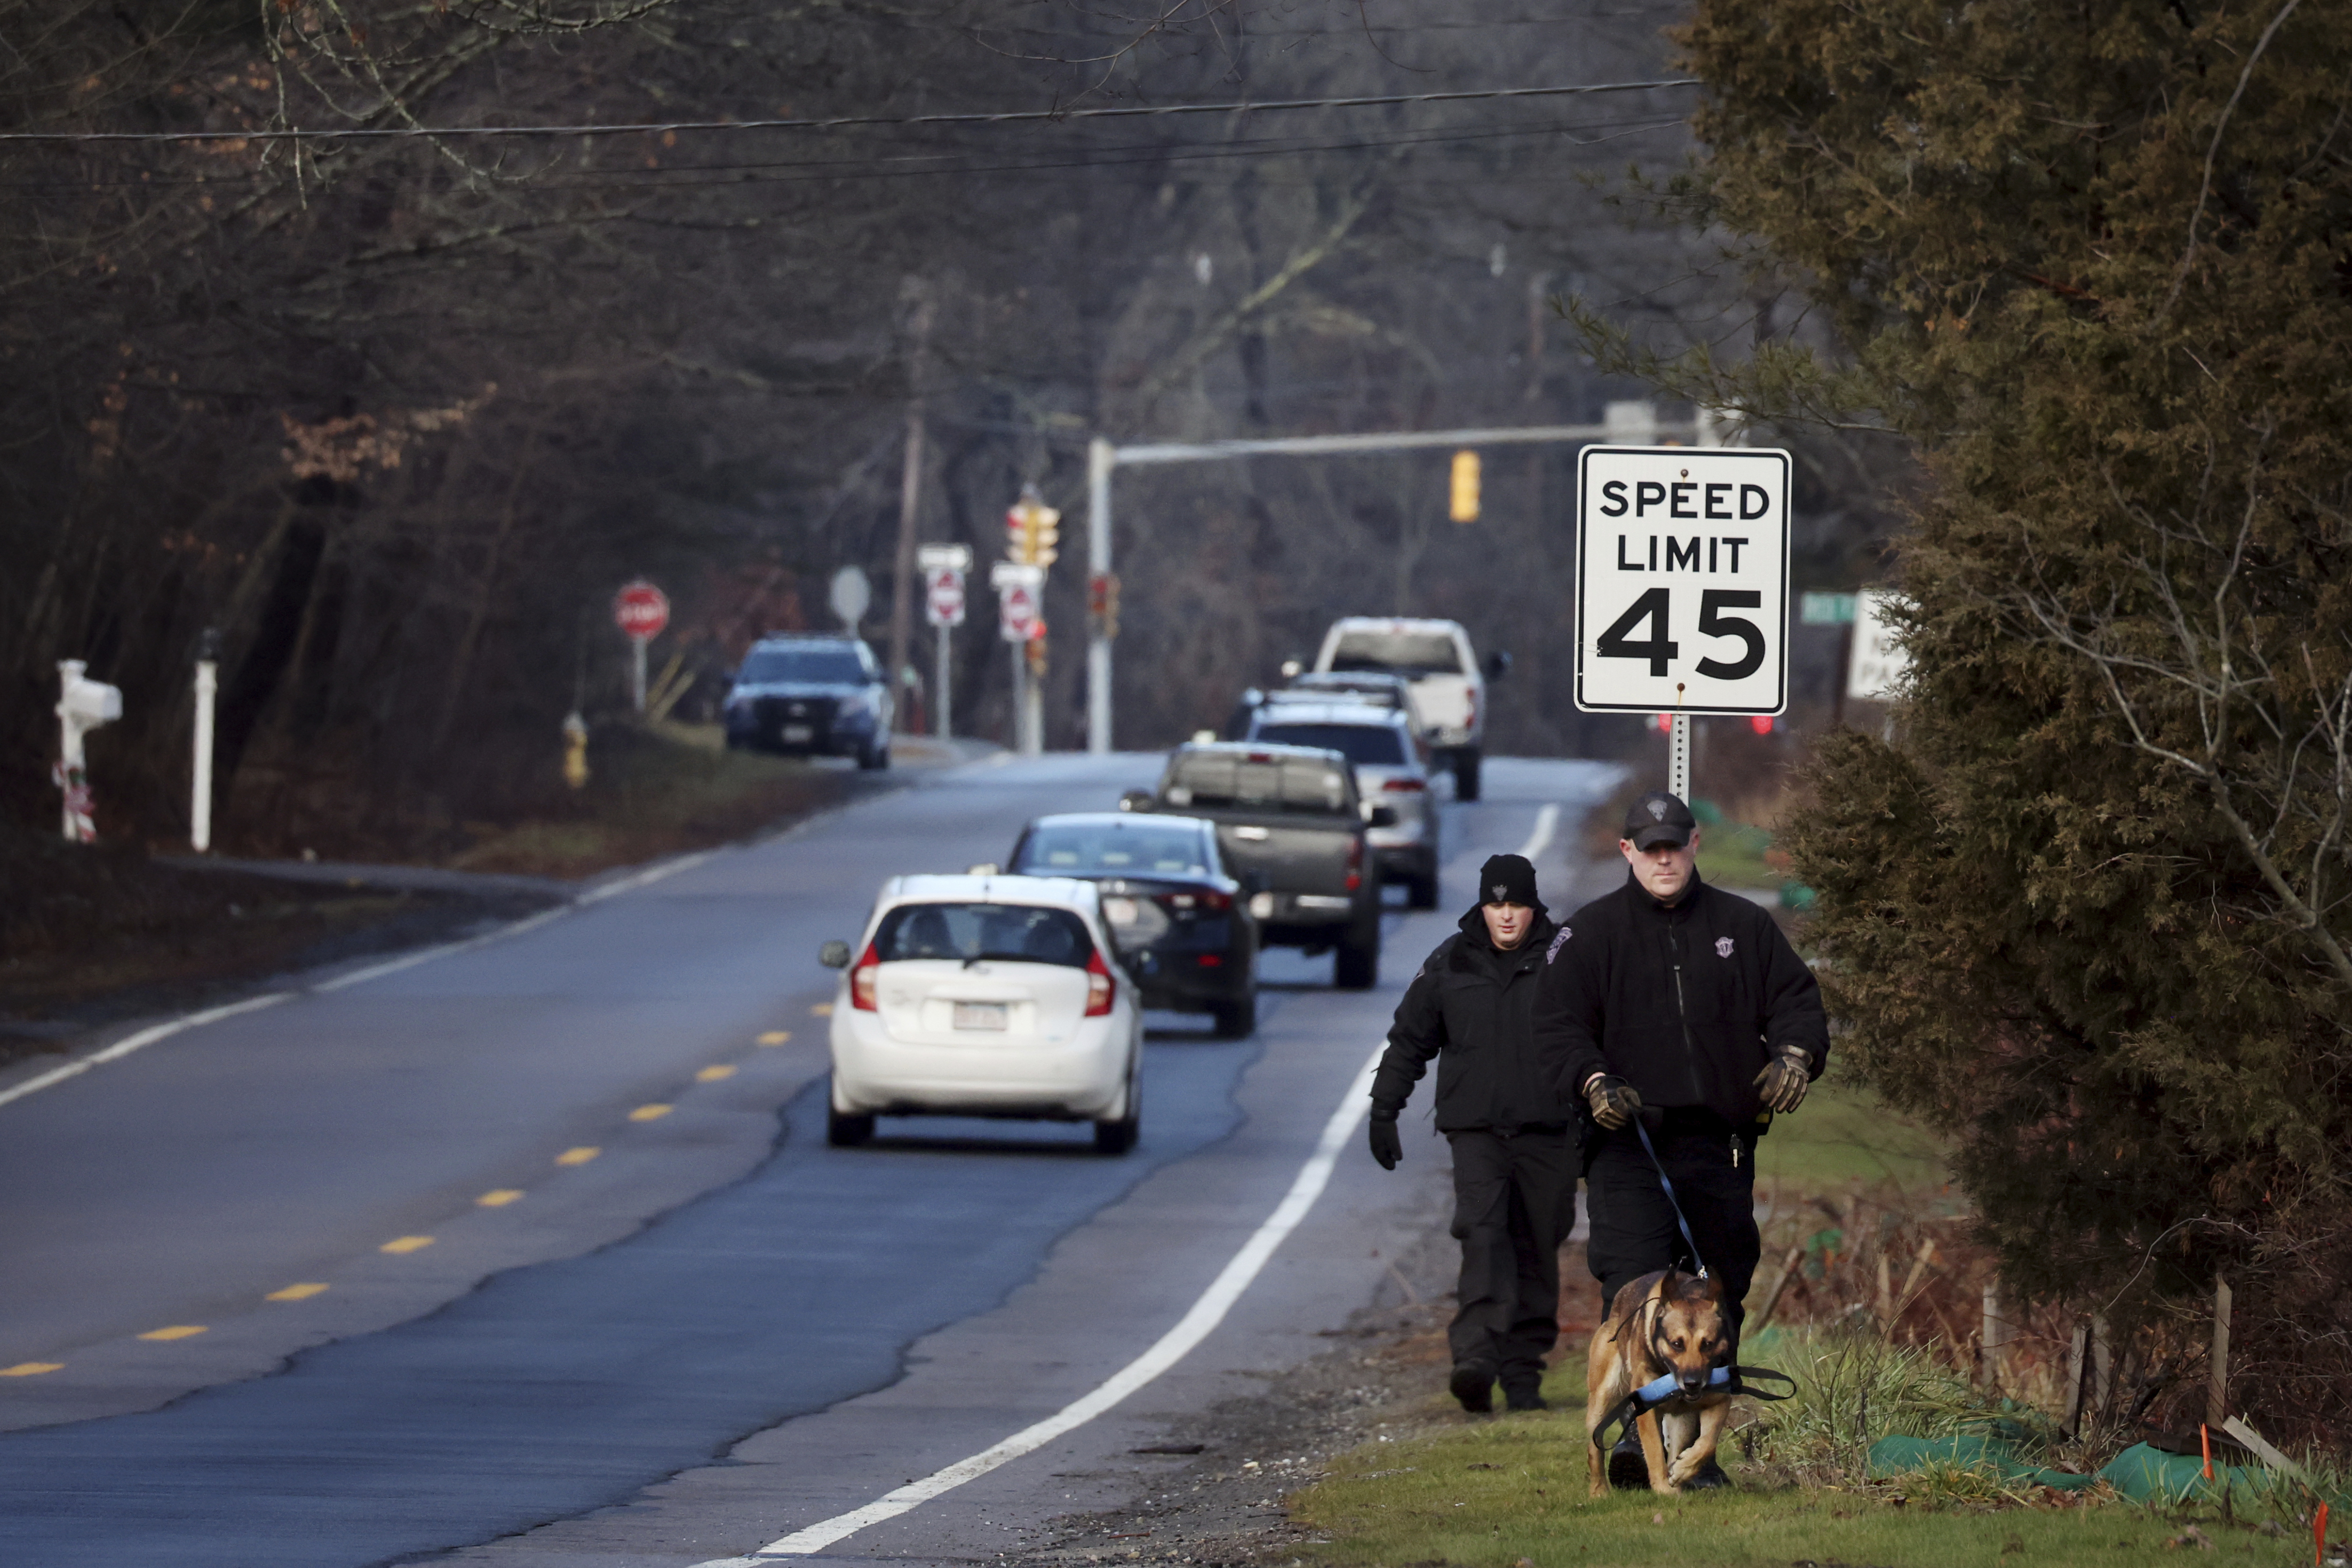 Members of a State Police K-9 unit search on Chief Justice Cushing Highway in Cohasset, Mass., Jan. 7, 2022. Authorities say the husband of a missing Massachusetts woman has been arrested for allegedly misleading investigators. Cohasset police and Massachusetts State Police on Sunday took Brian Walshe, 46, of Cohasset, Mass., into custody. His arrest comes after state and local police suspended their ground search for 39-year-old Ana Walshe, who has been missing since New Year’s Day. (Craig F. Walker/The Boston Globe via AP) (Craig F. Walker/The Boston Globe/AP)